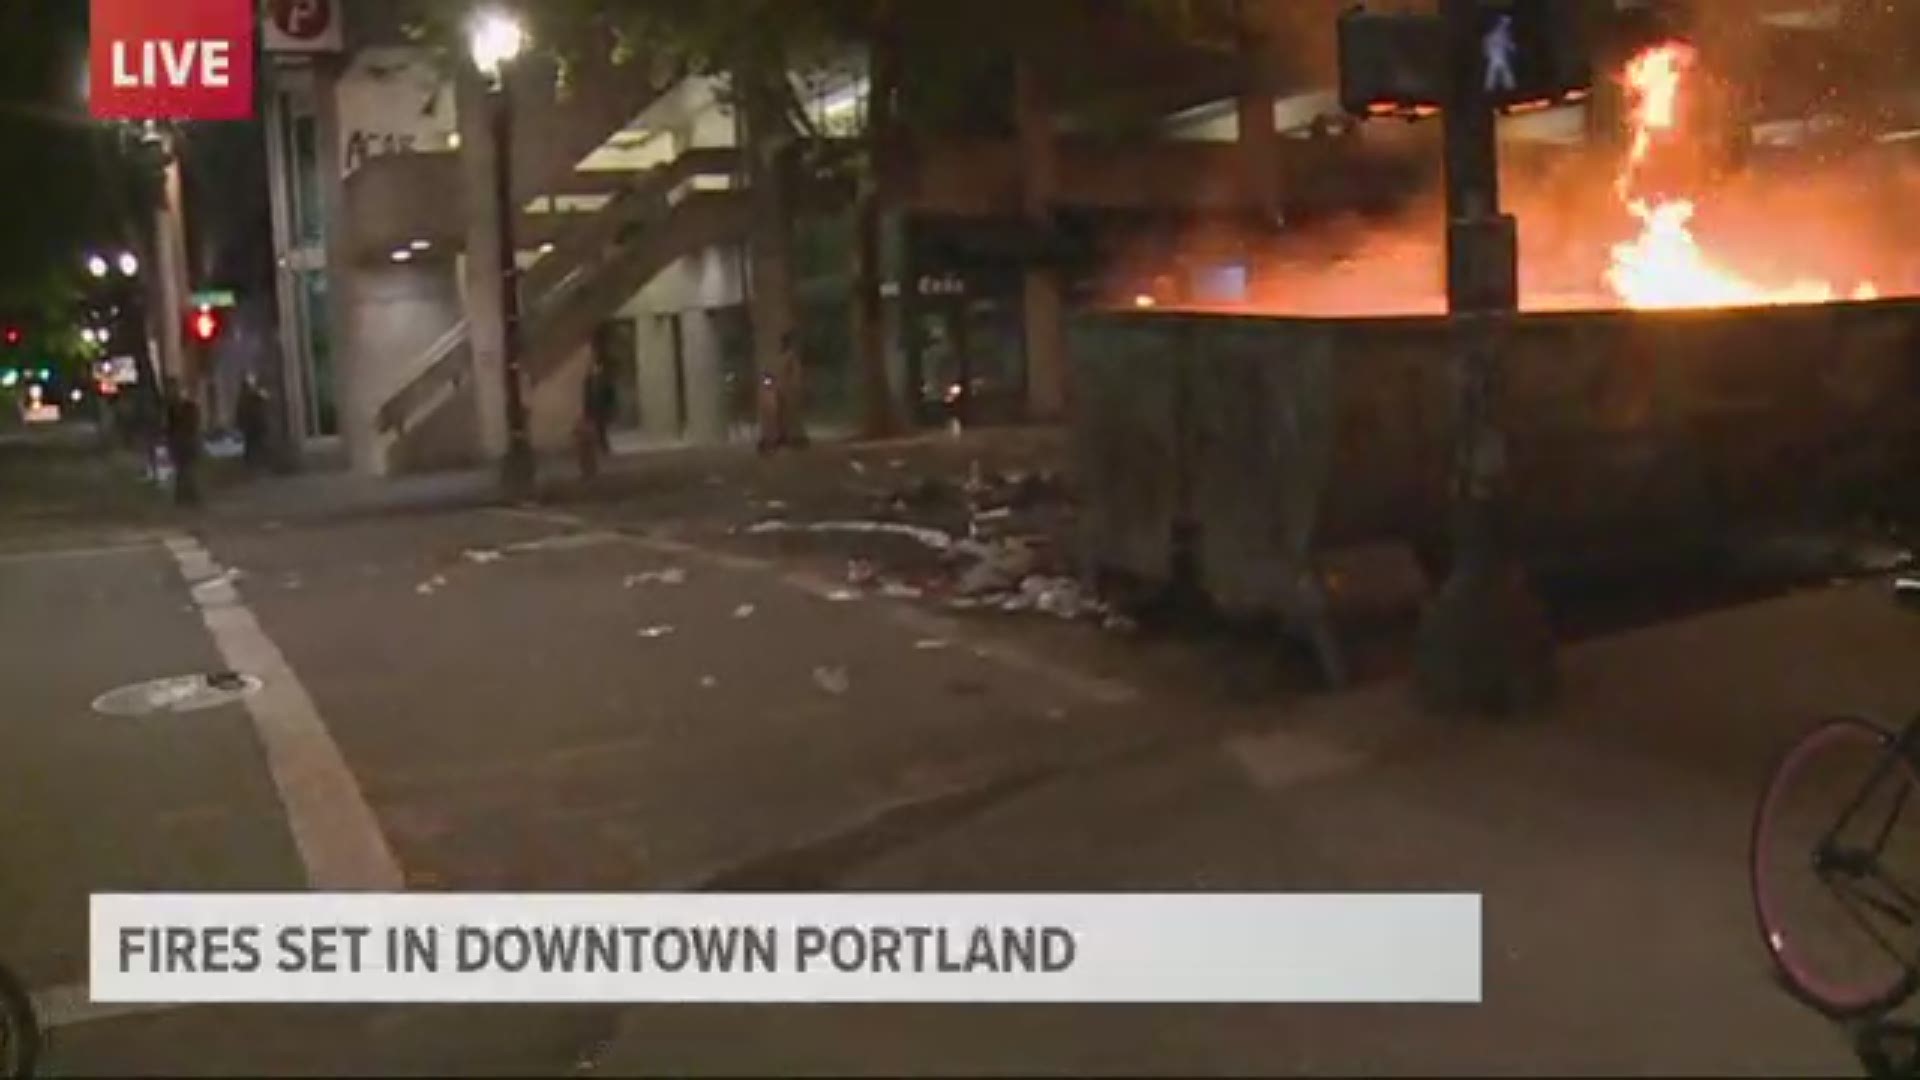 Mayor Ted Wheeler reacts to riot, vandalism, fires in downtown Portland